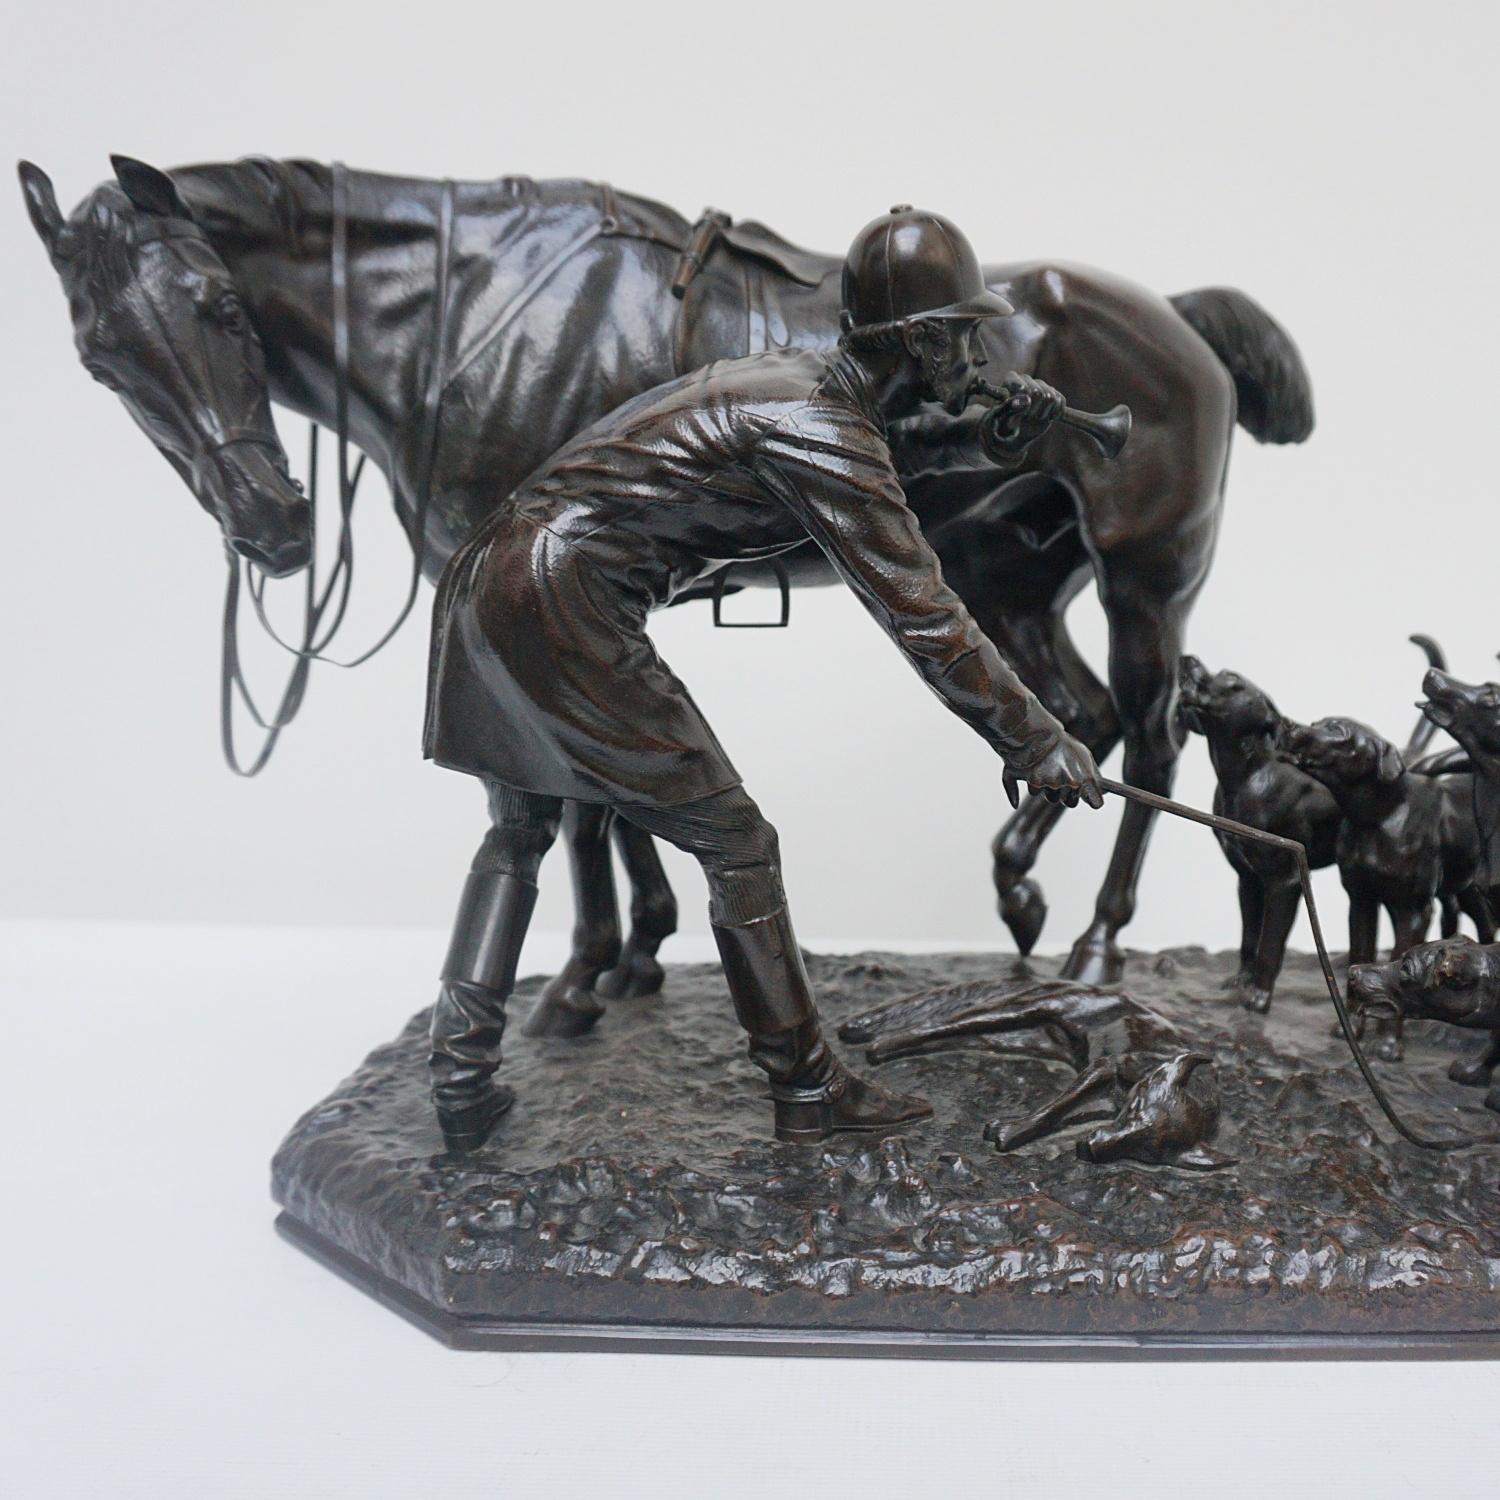 A patinated bronze sculpture by John Willis Good (1845-1878) depicting an English countryside Fox hunting scene. A saddled horse dutifully standing astride his master, whip in hand, whilst the hounds gather around the captured Fox. Set over a